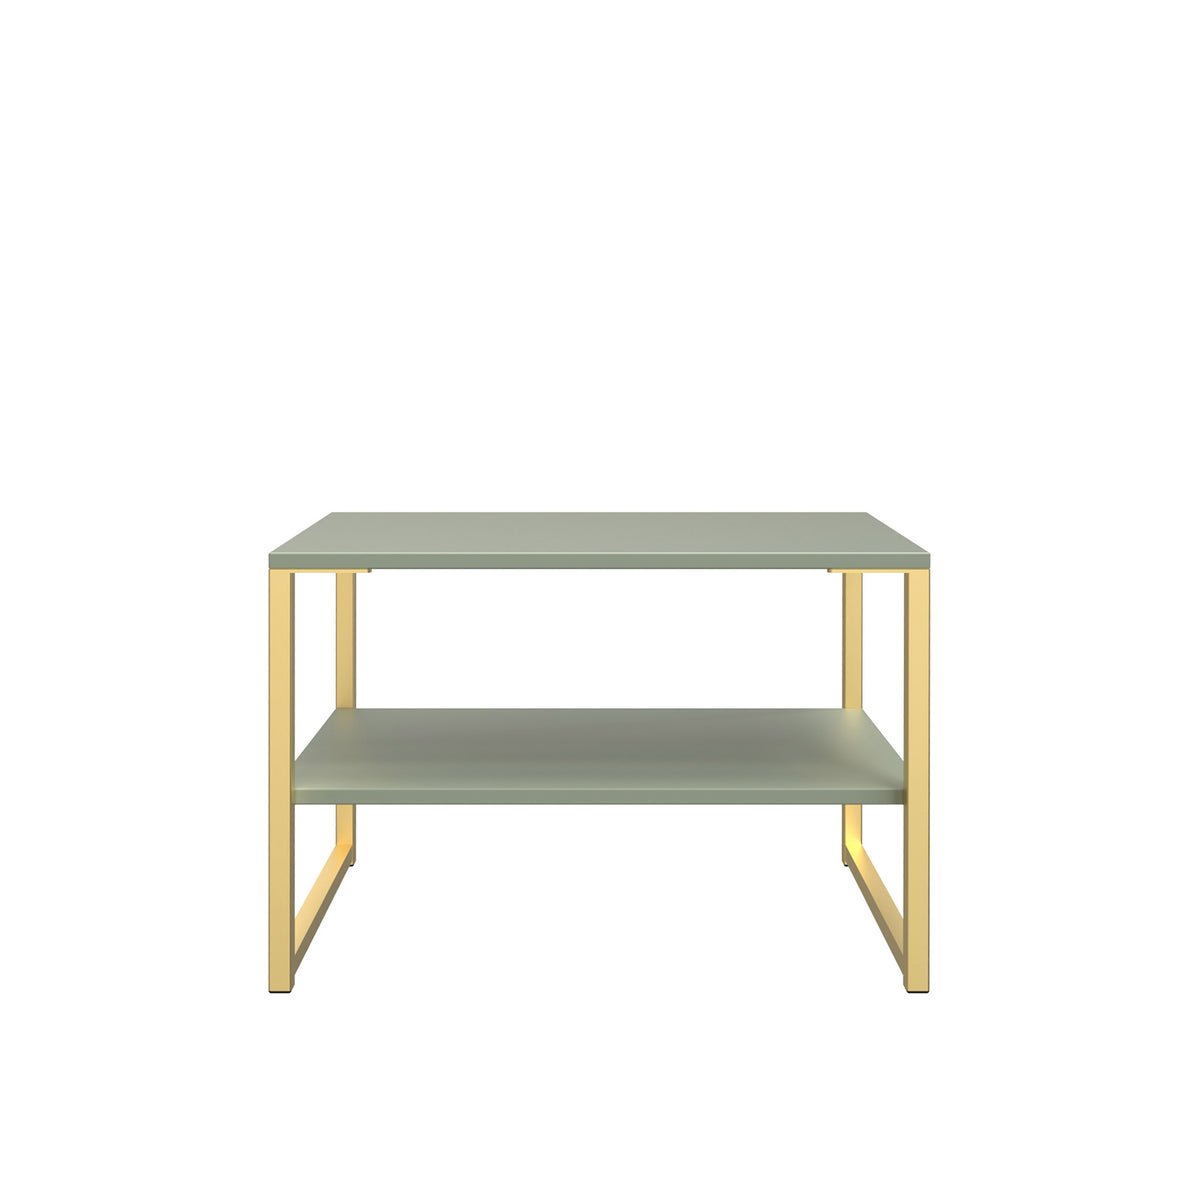 Hudson Olive Sofa Side Lamp Table with shelf and gold legs from Roseland